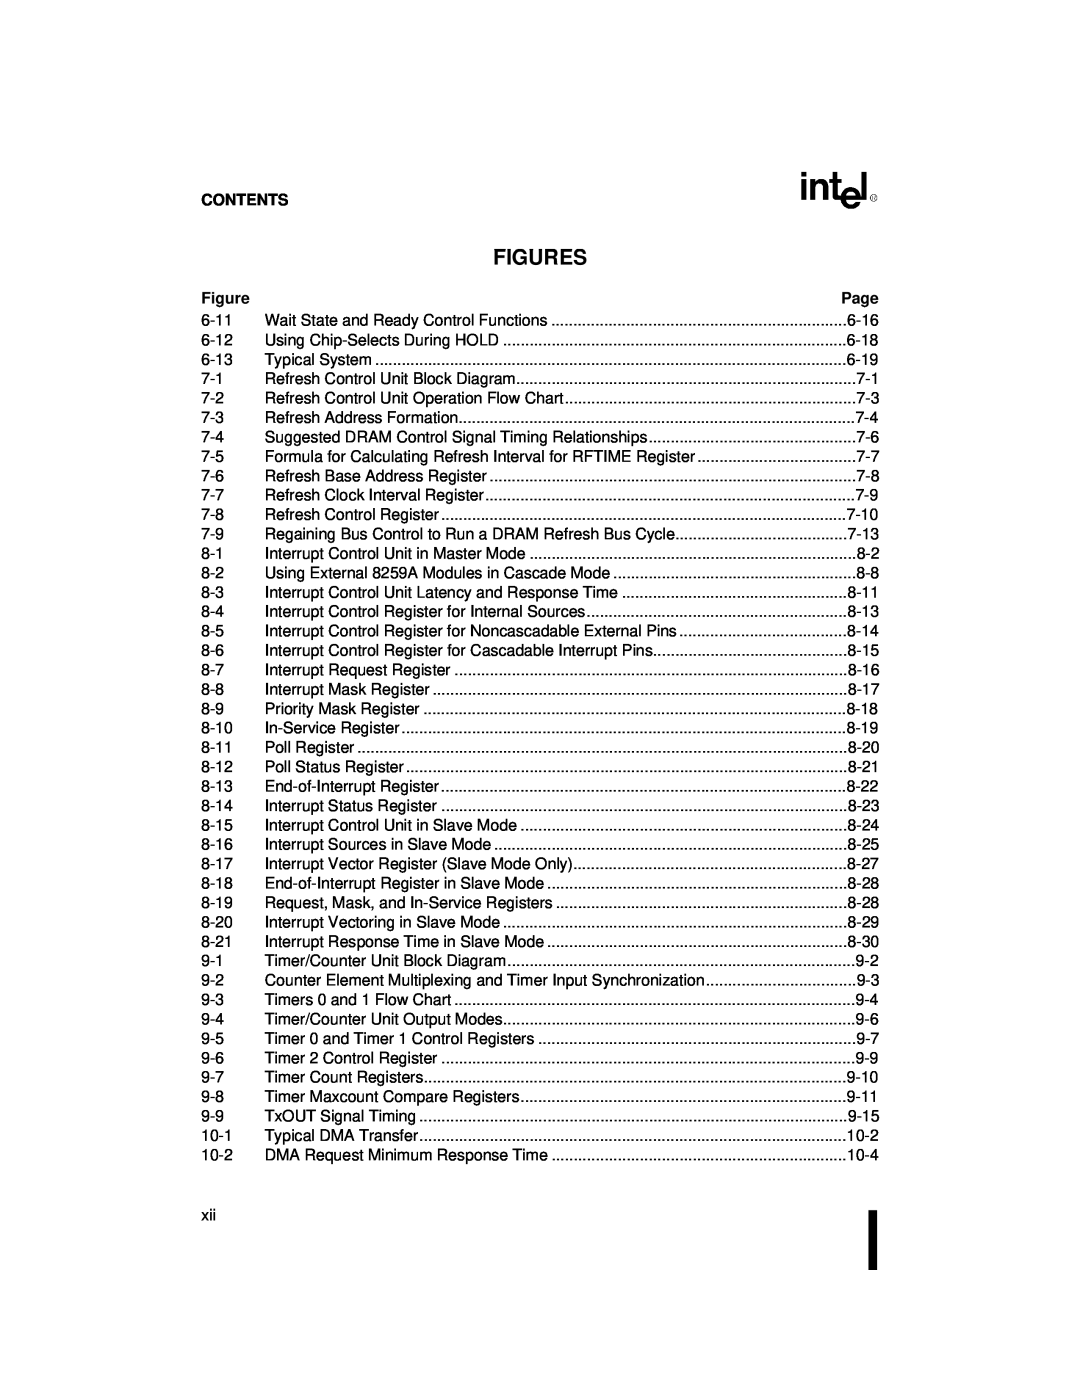 Intel 80C186XL, 80C188XL user manual Figures, Contents, Page, 6-11 